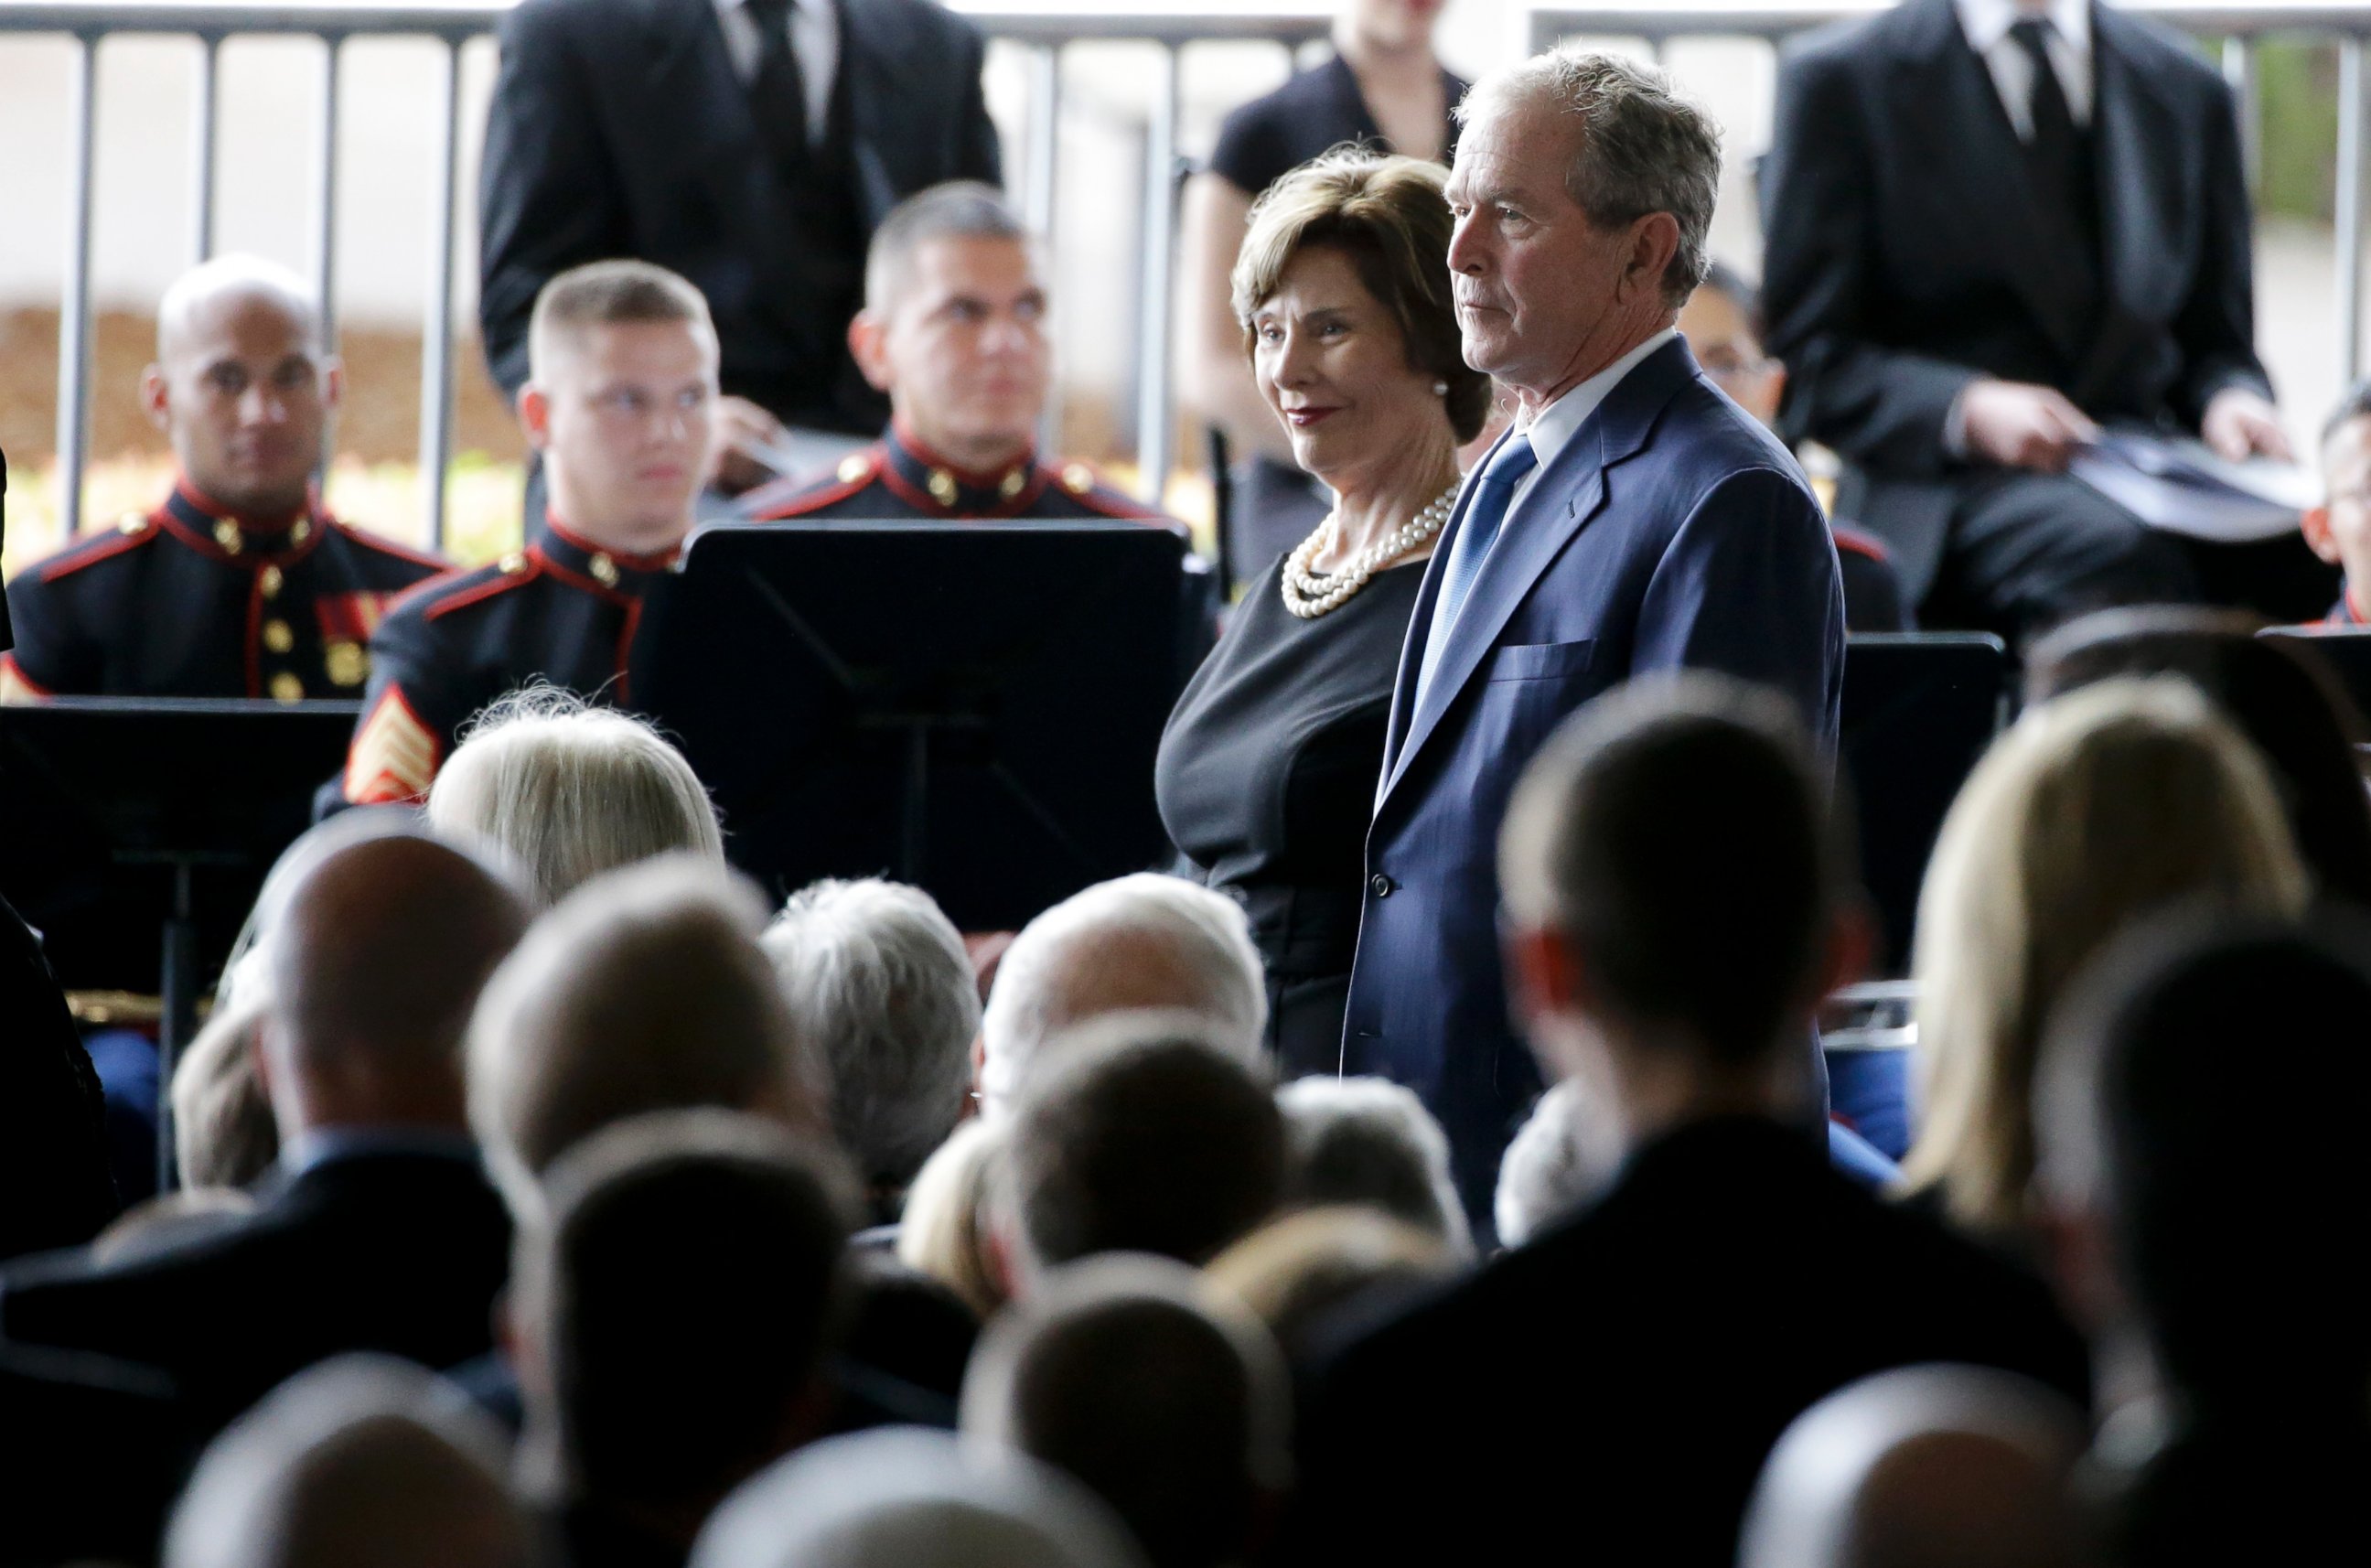 PHOTO: Former President George W. Bush and Laura Bush arrive for the funeral service for Nancy Reagan at the Ronald Reagan Presidential Library, March 11, 2016 in Simi Valley, Calif.